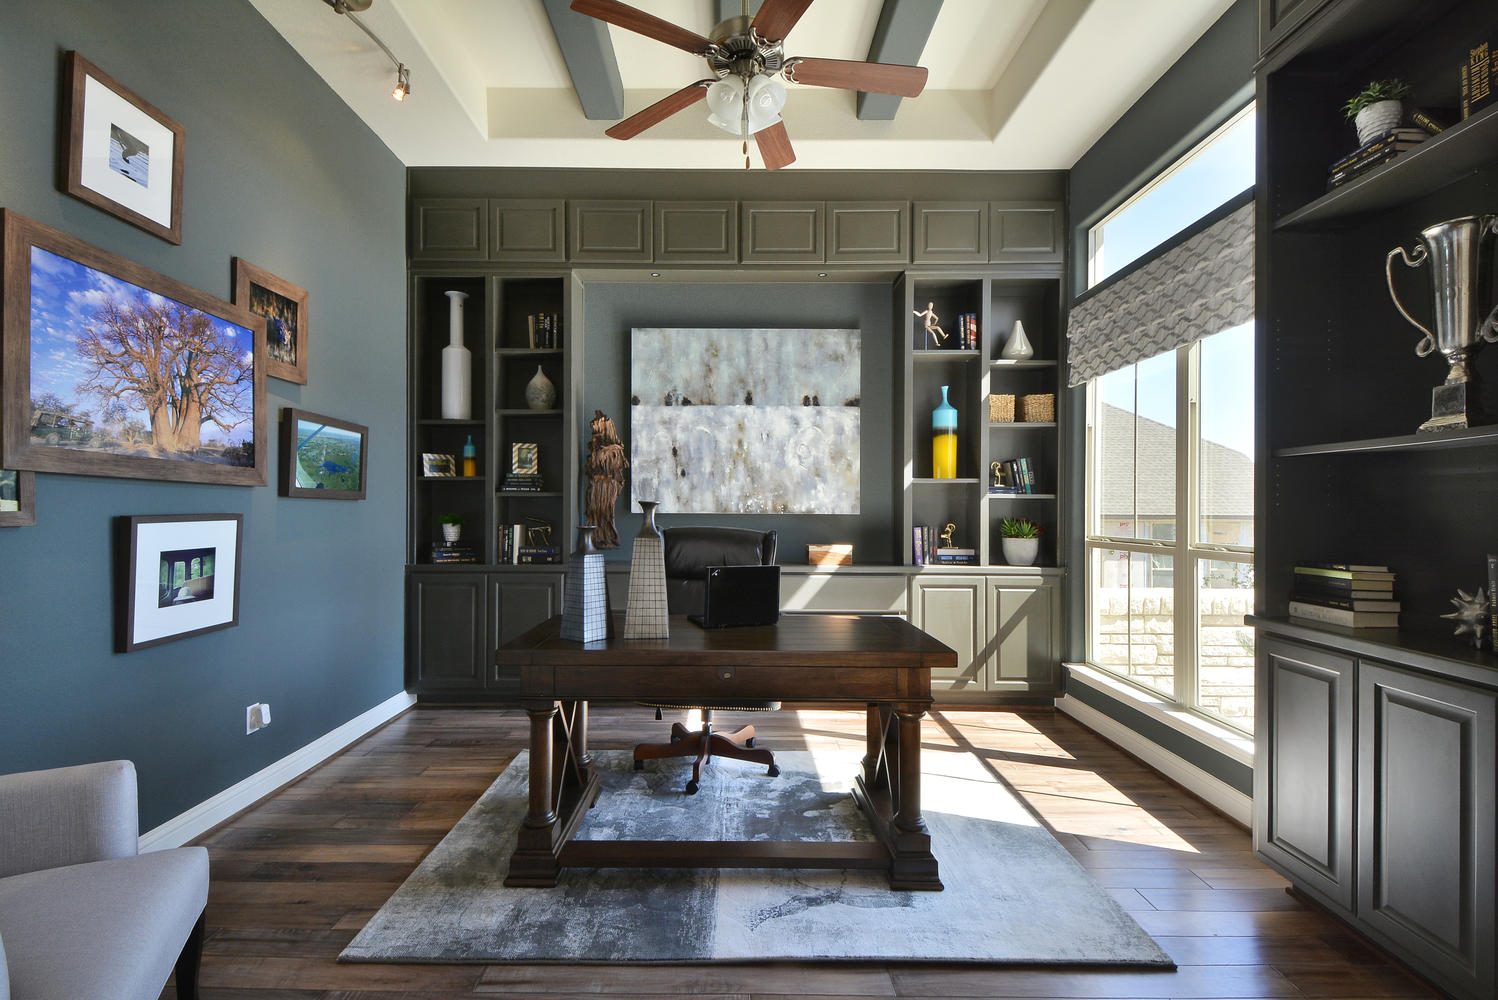 Burrows Cabinets' study with Umber gray cabinets